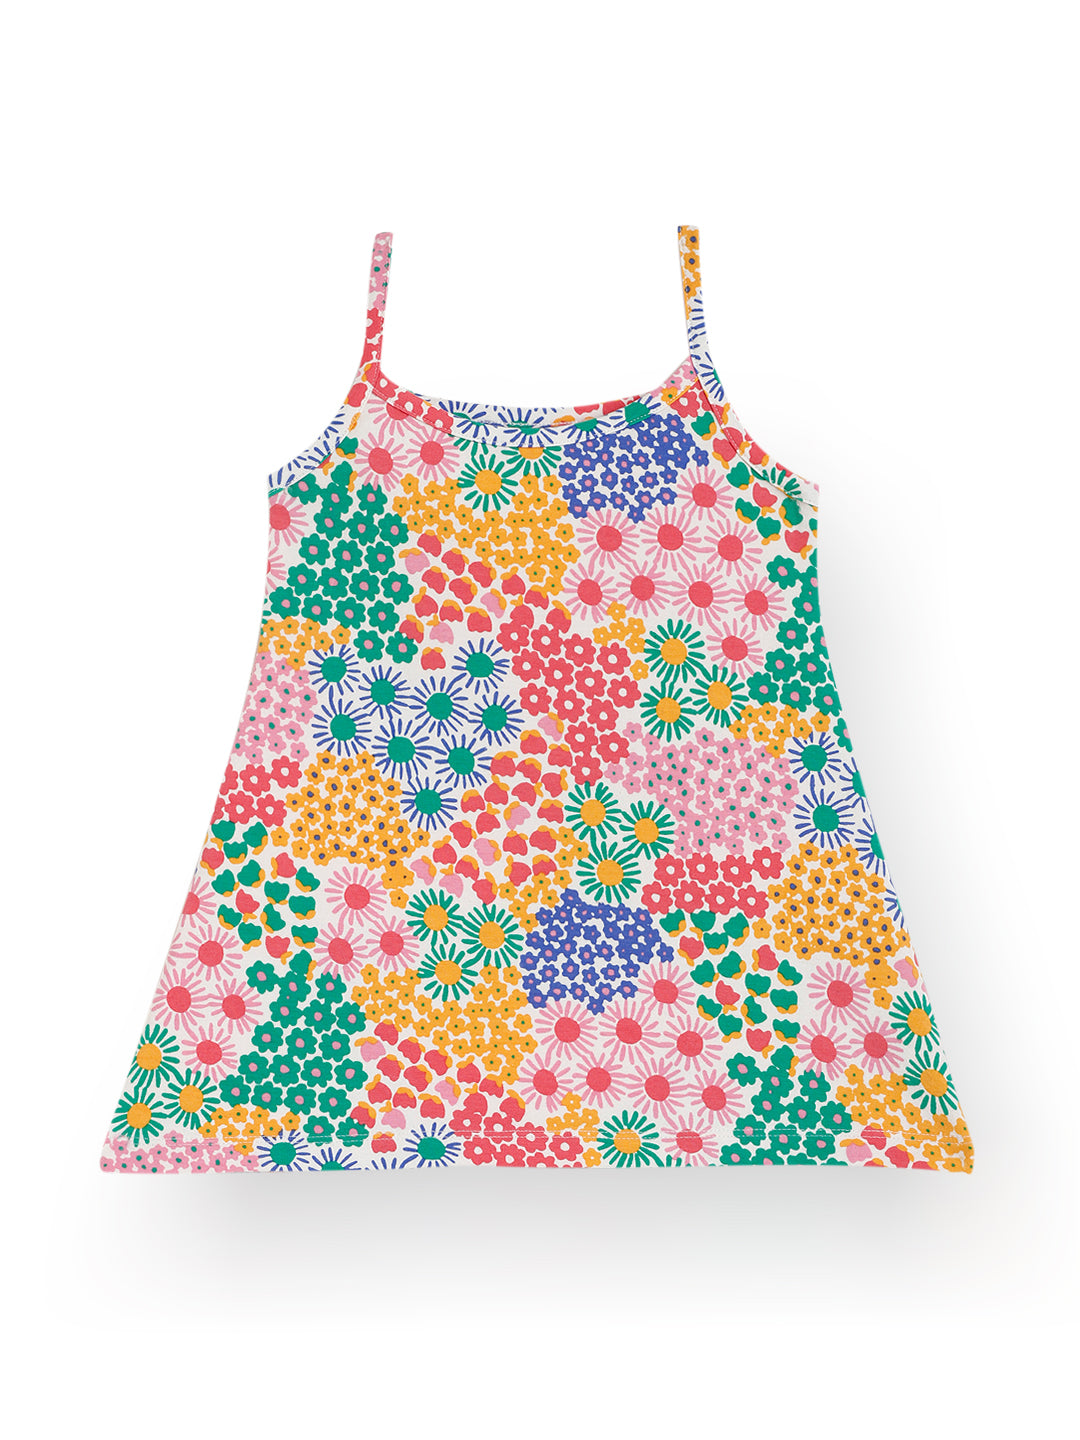 FLOWERS SUMMER STRAPPY GIRLS TOP - PINK